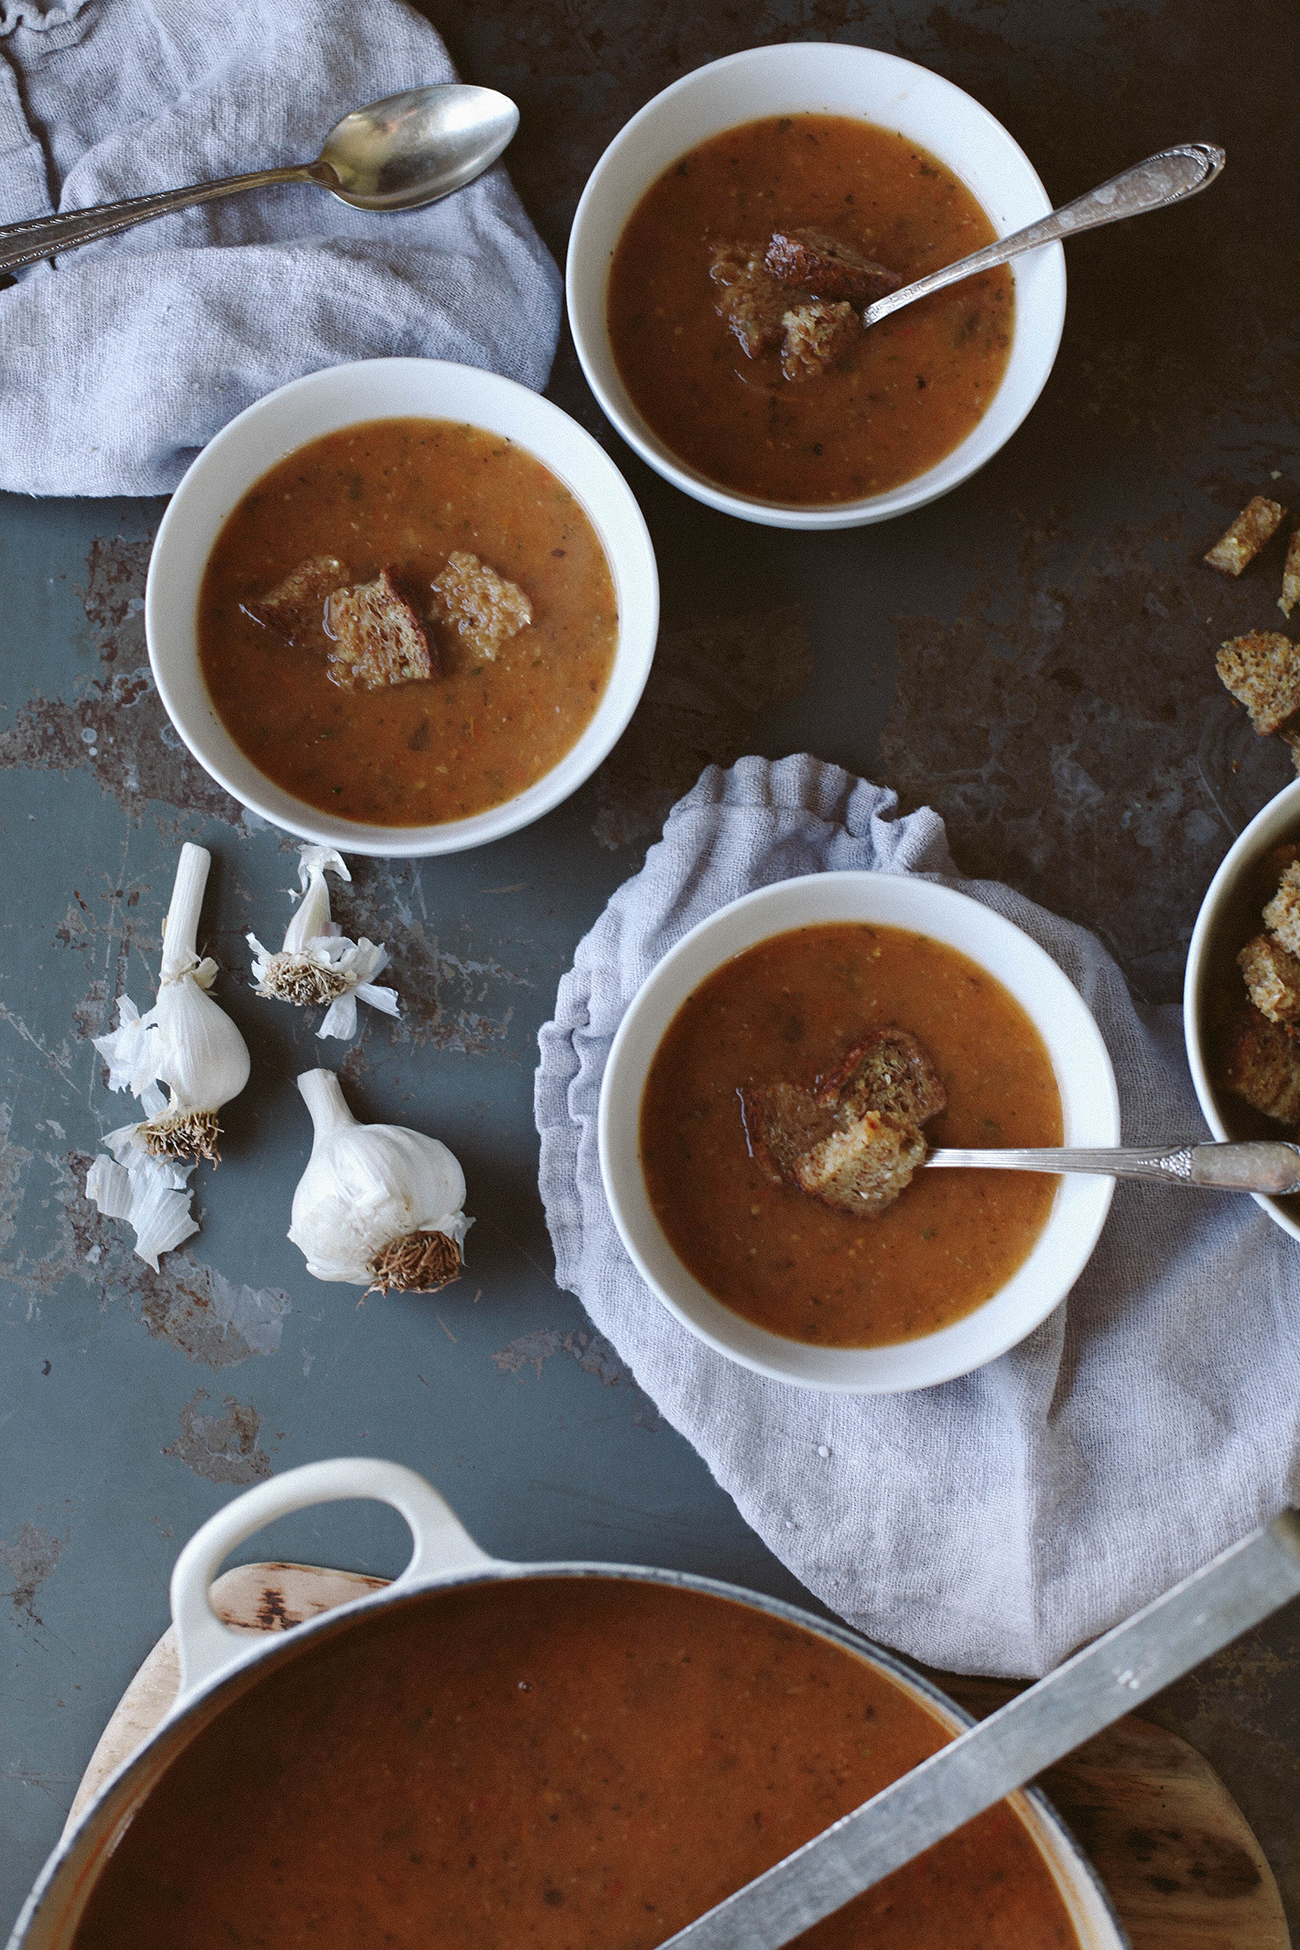 A Daily Something - Roasted Eggplant Tomato Soup